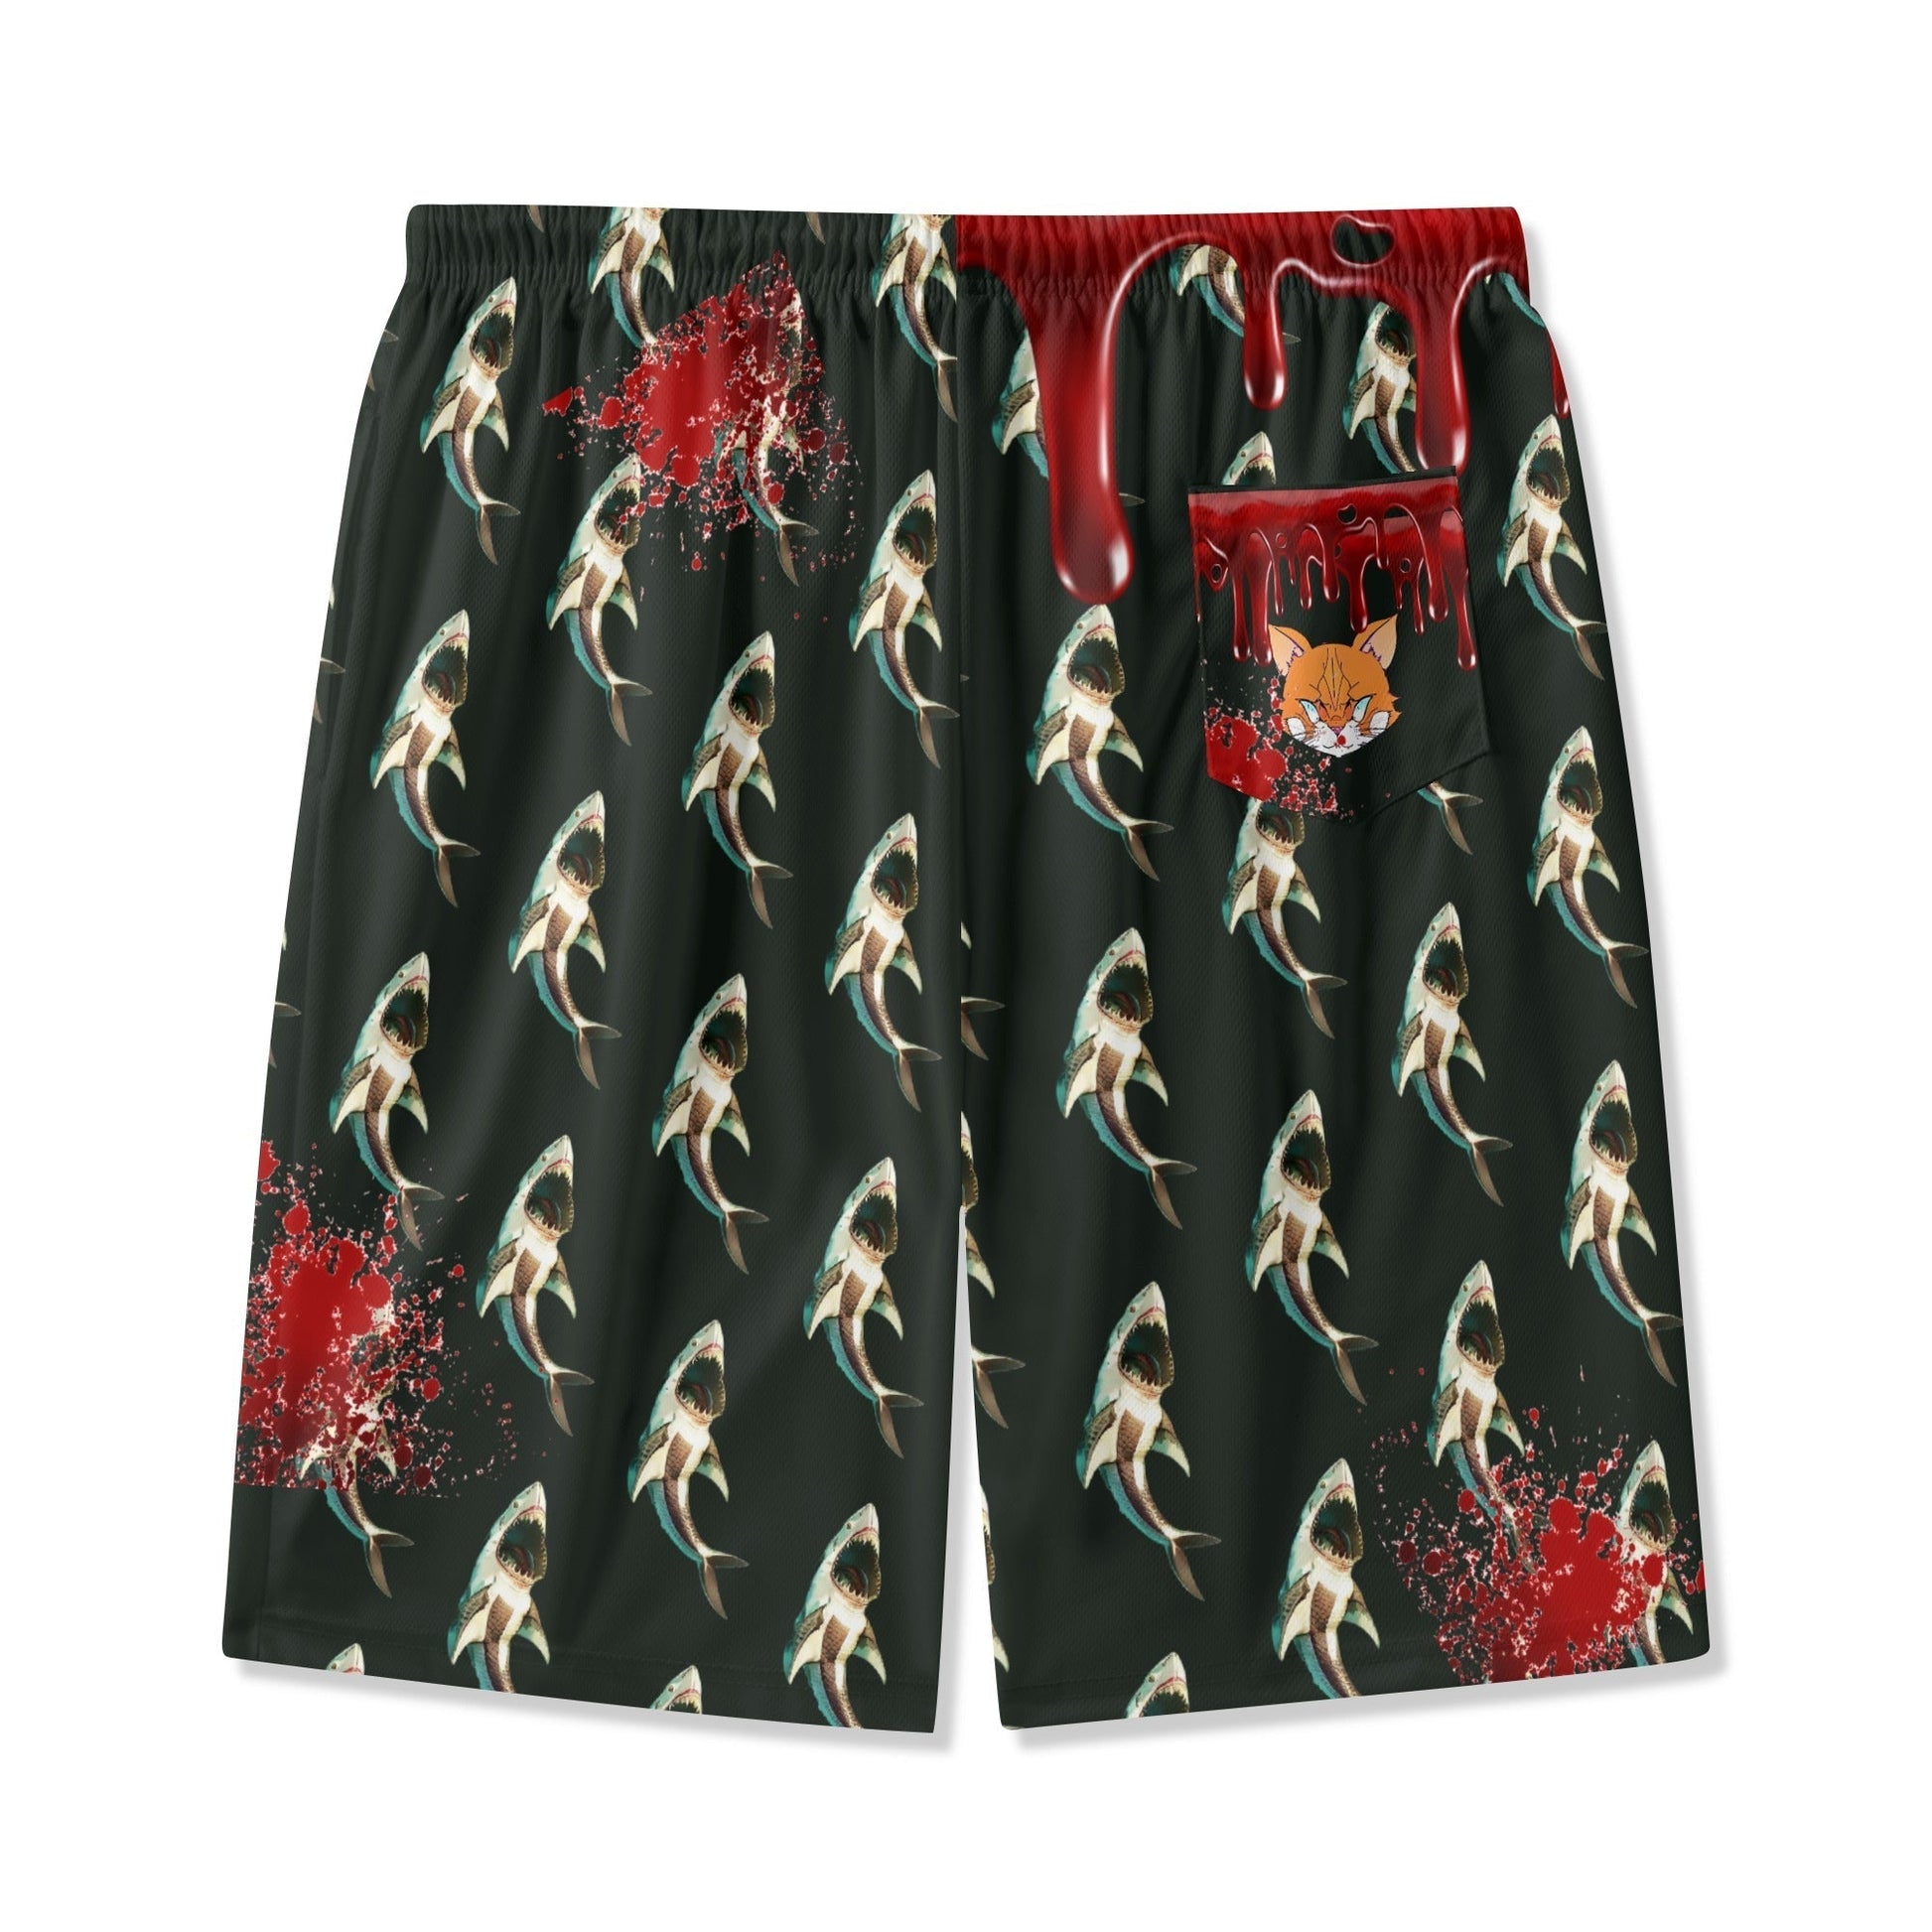 Stand out  with the  Shank Attack Youth Lightweight Beach Shorts  available at Hey Nugget. Grab yours today!